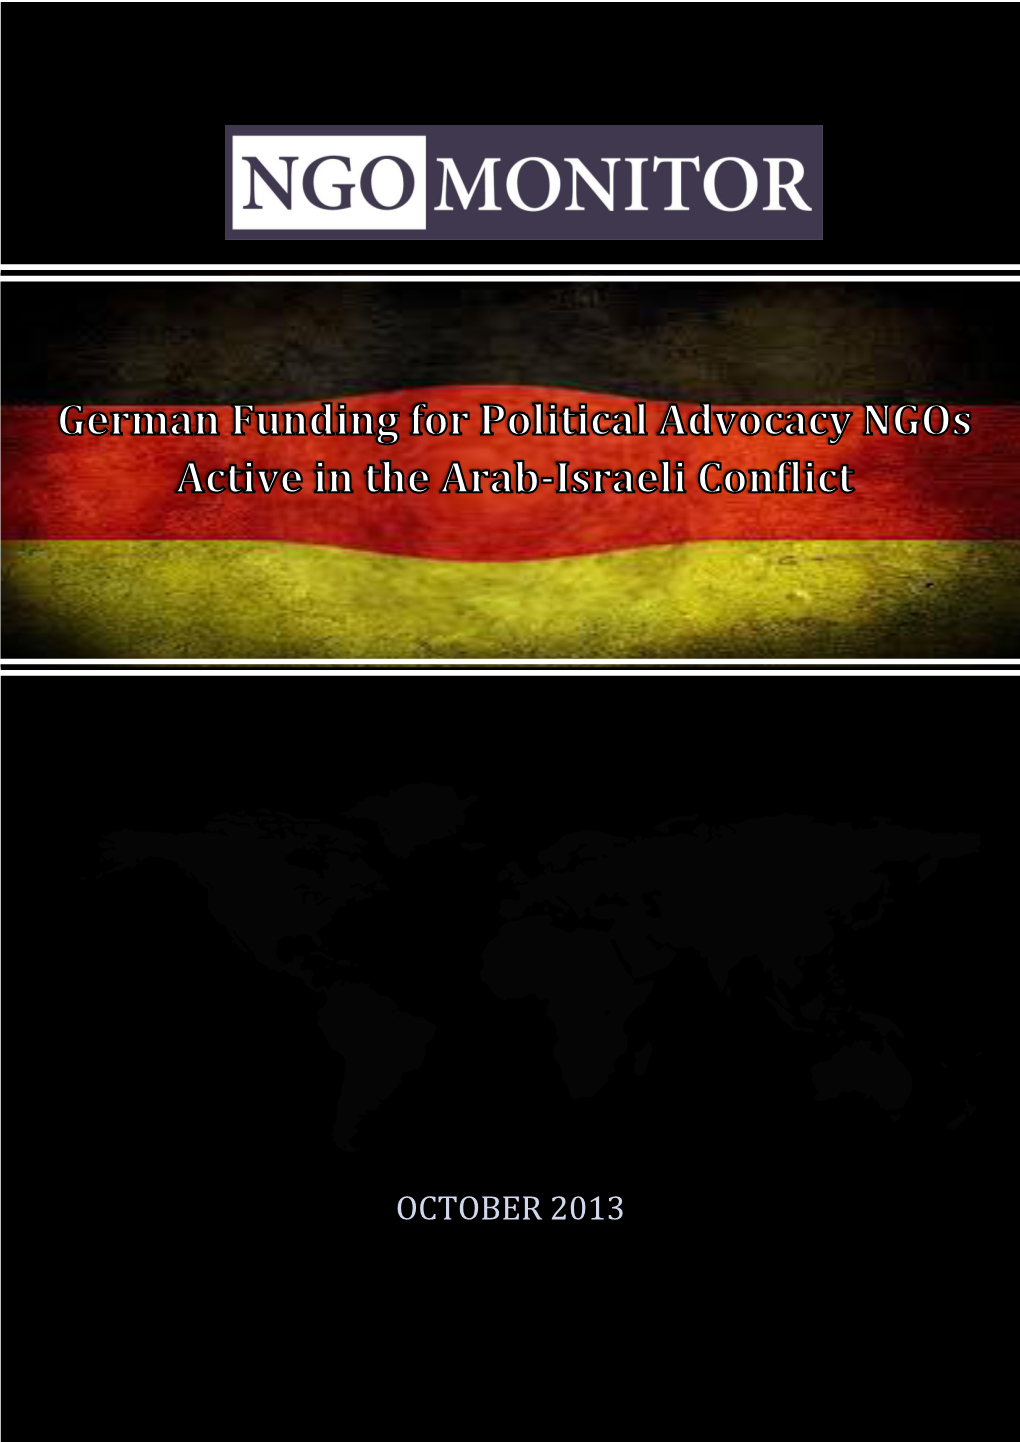 OCTOBER 2013 German Funding for Political Advocacy Ngos Active in the Arab-Israeli Conflict